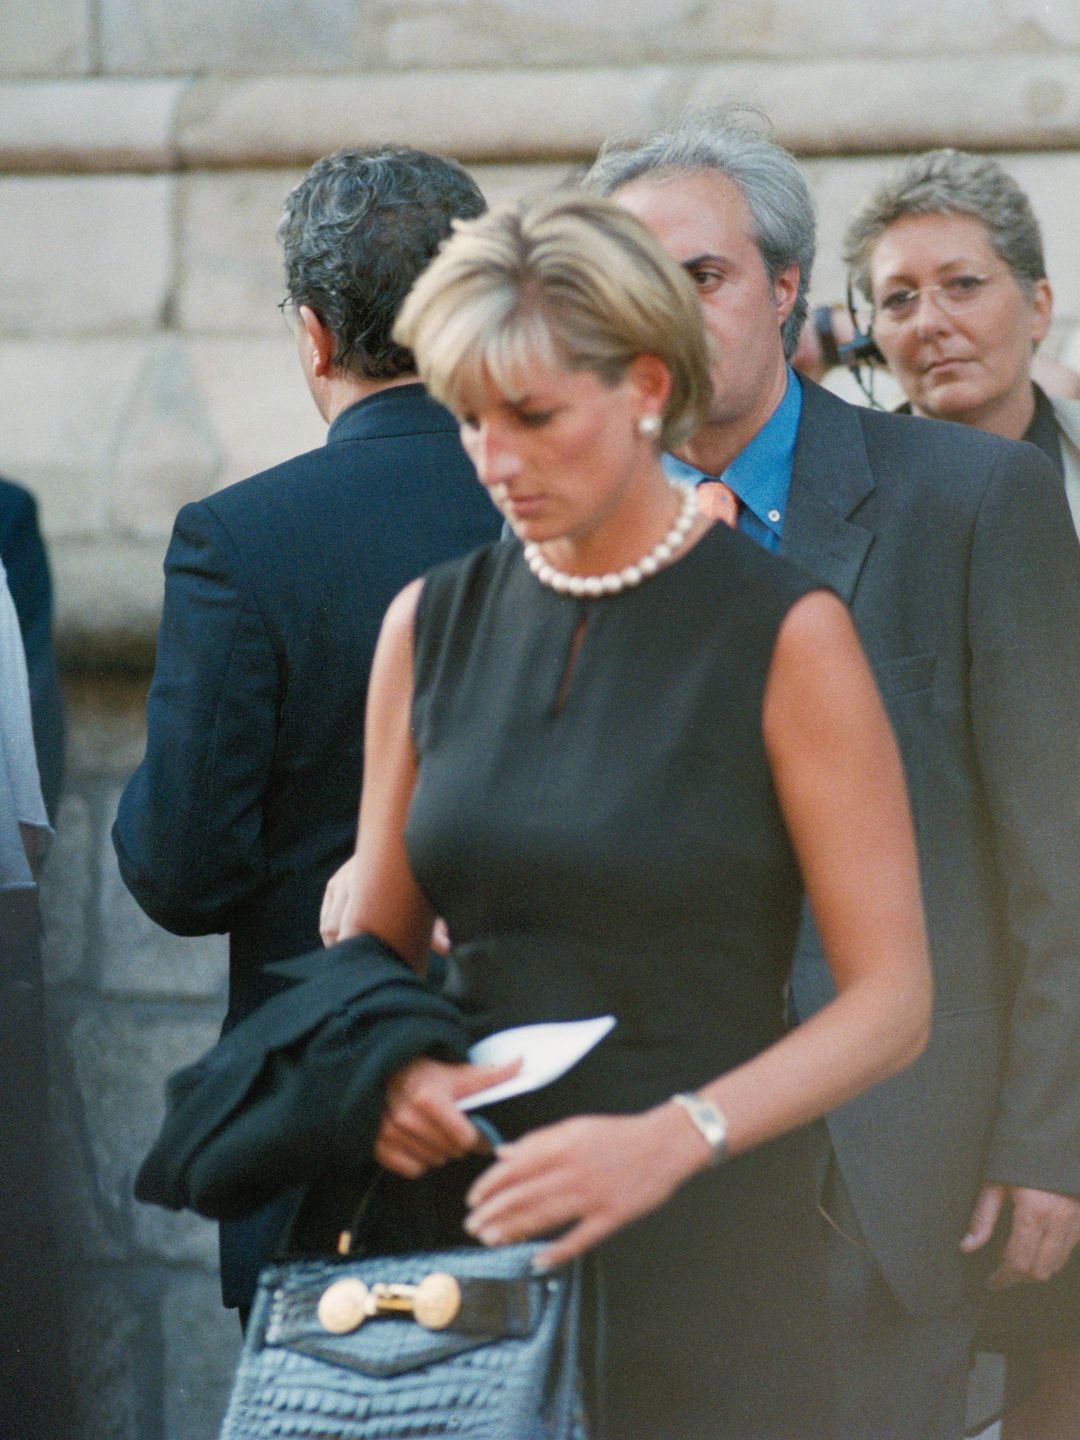 Diana, Princess of Wales at the last tribute to Gianni Versace at Milan Cathedral carrying her 'Diana' handbag